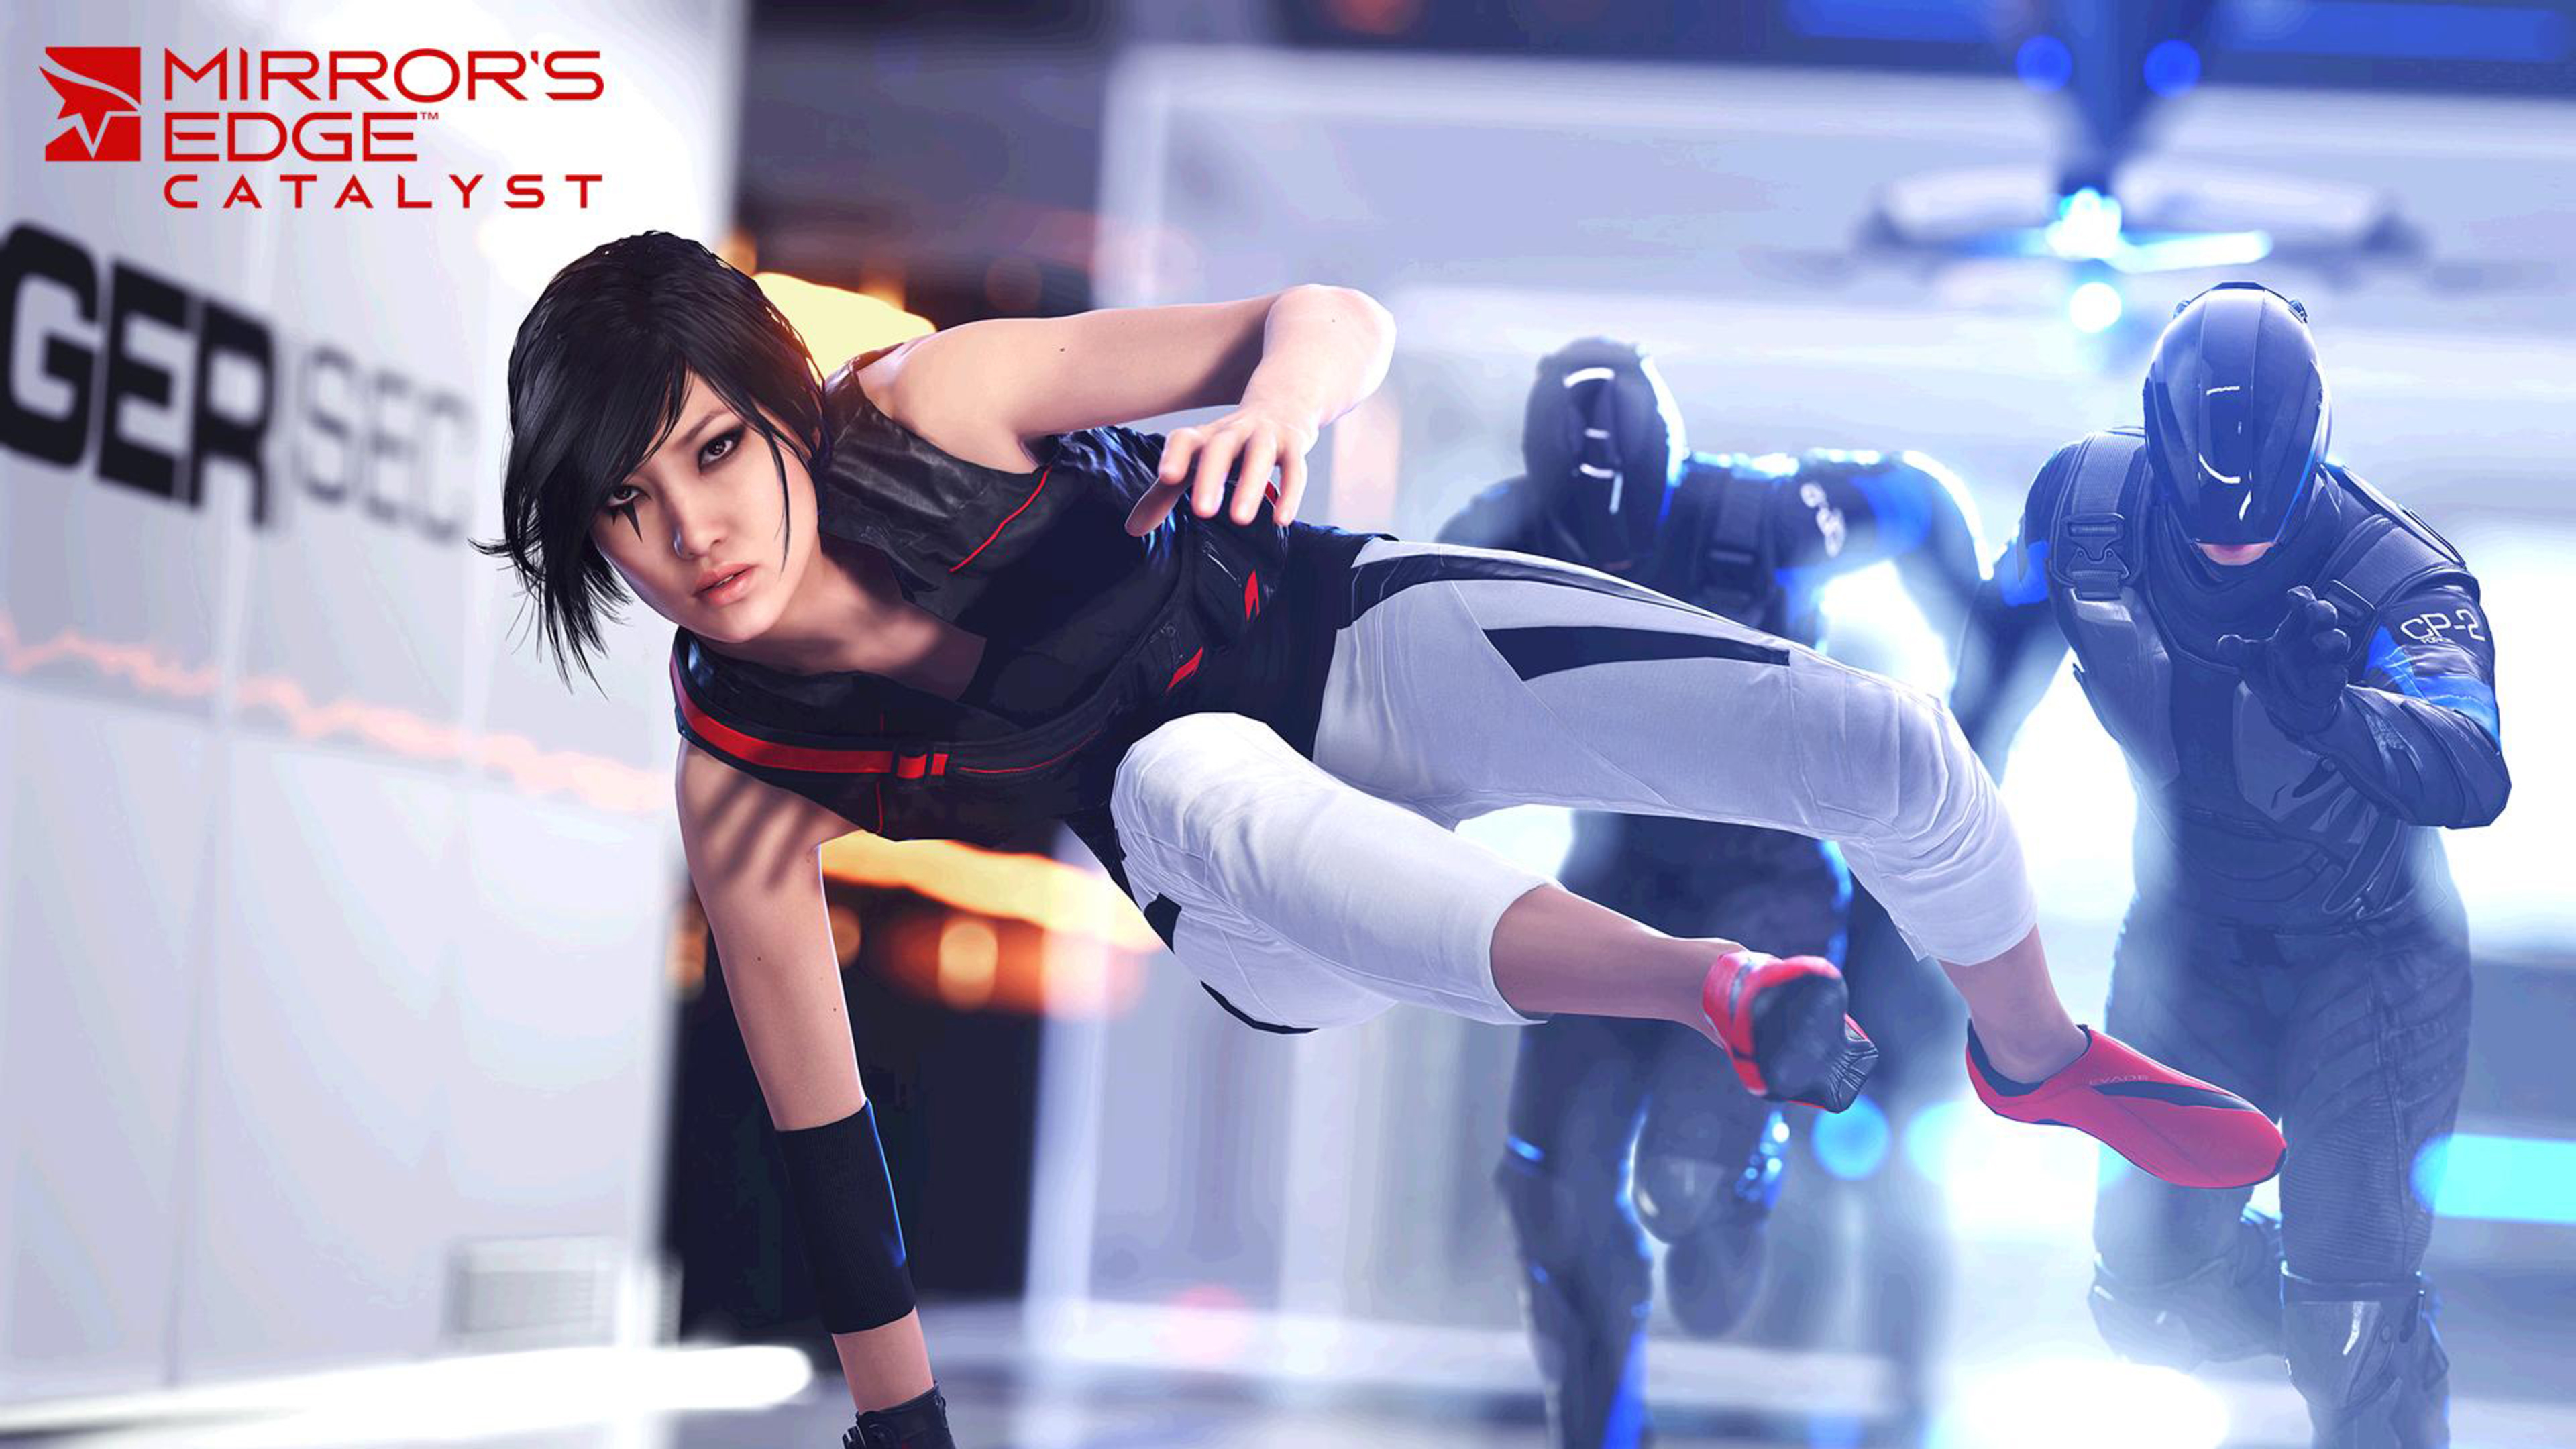 Wallpaper ID 309968  Video Game Mirrors Edge Catalyst Phone Wallpaper   1440x3040 free download